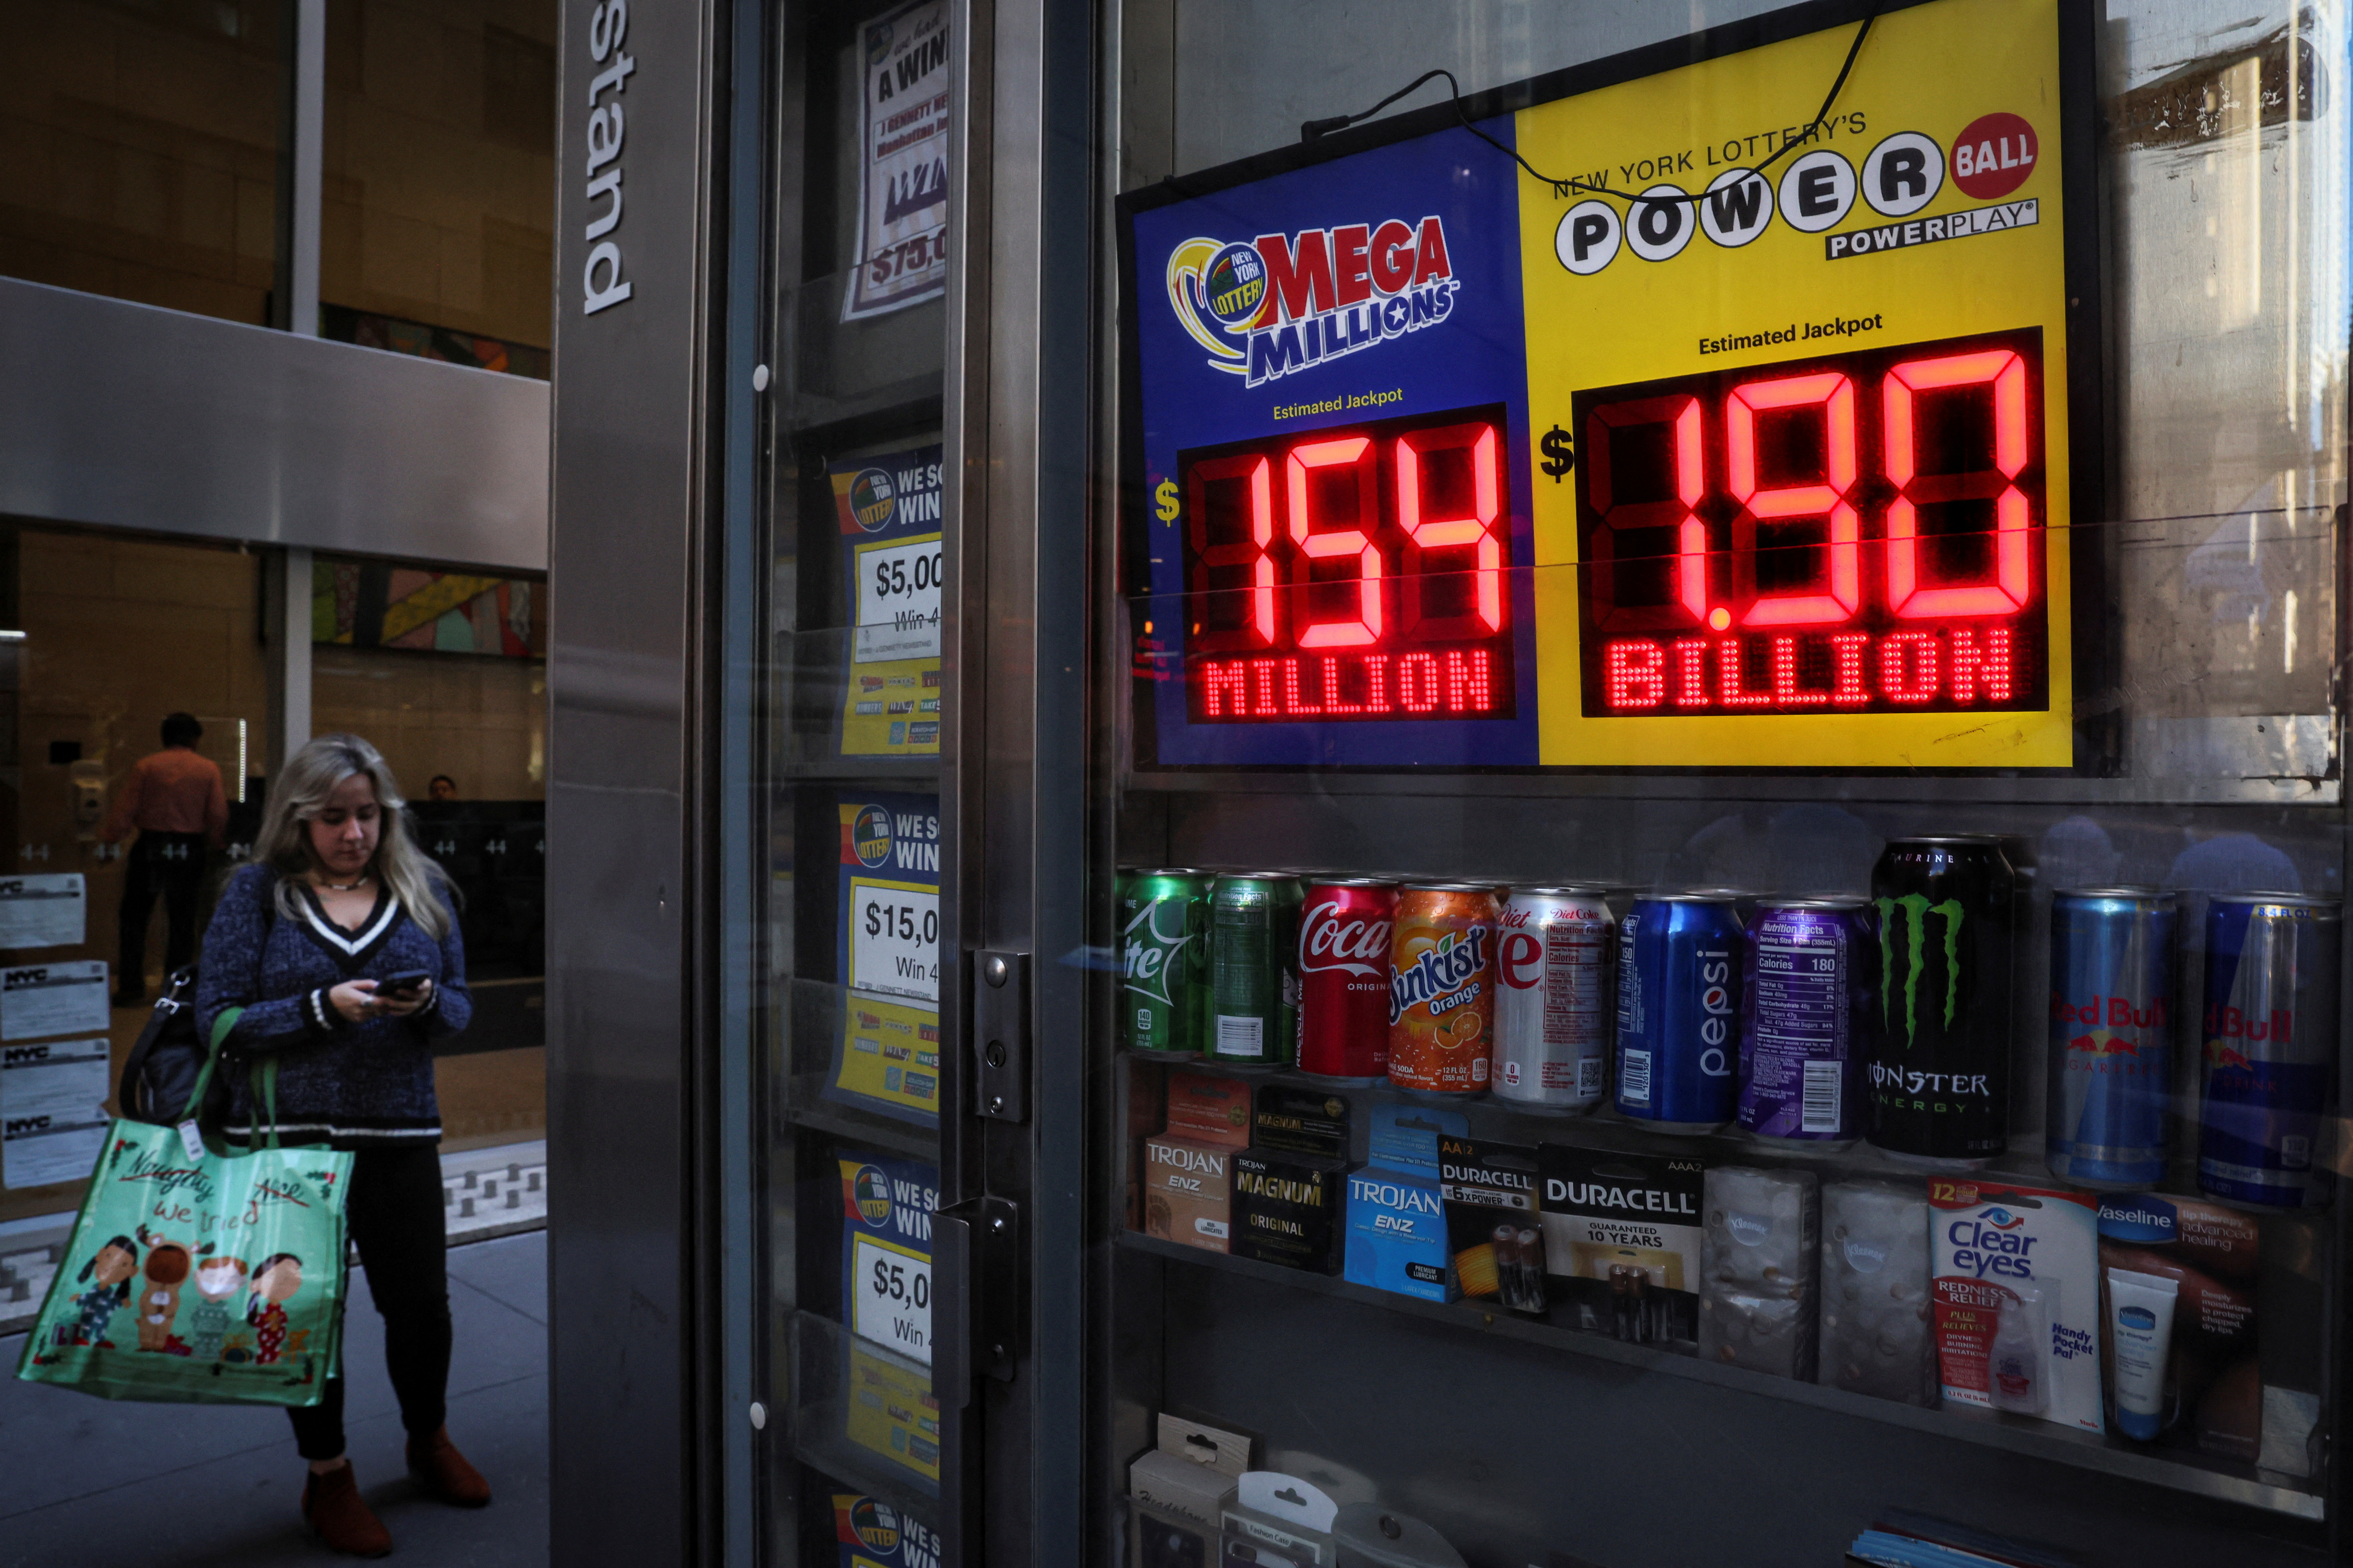 The odds of winning the jackpot are 1 in 292.2 million (REUTERS / Brendan McDermidt)